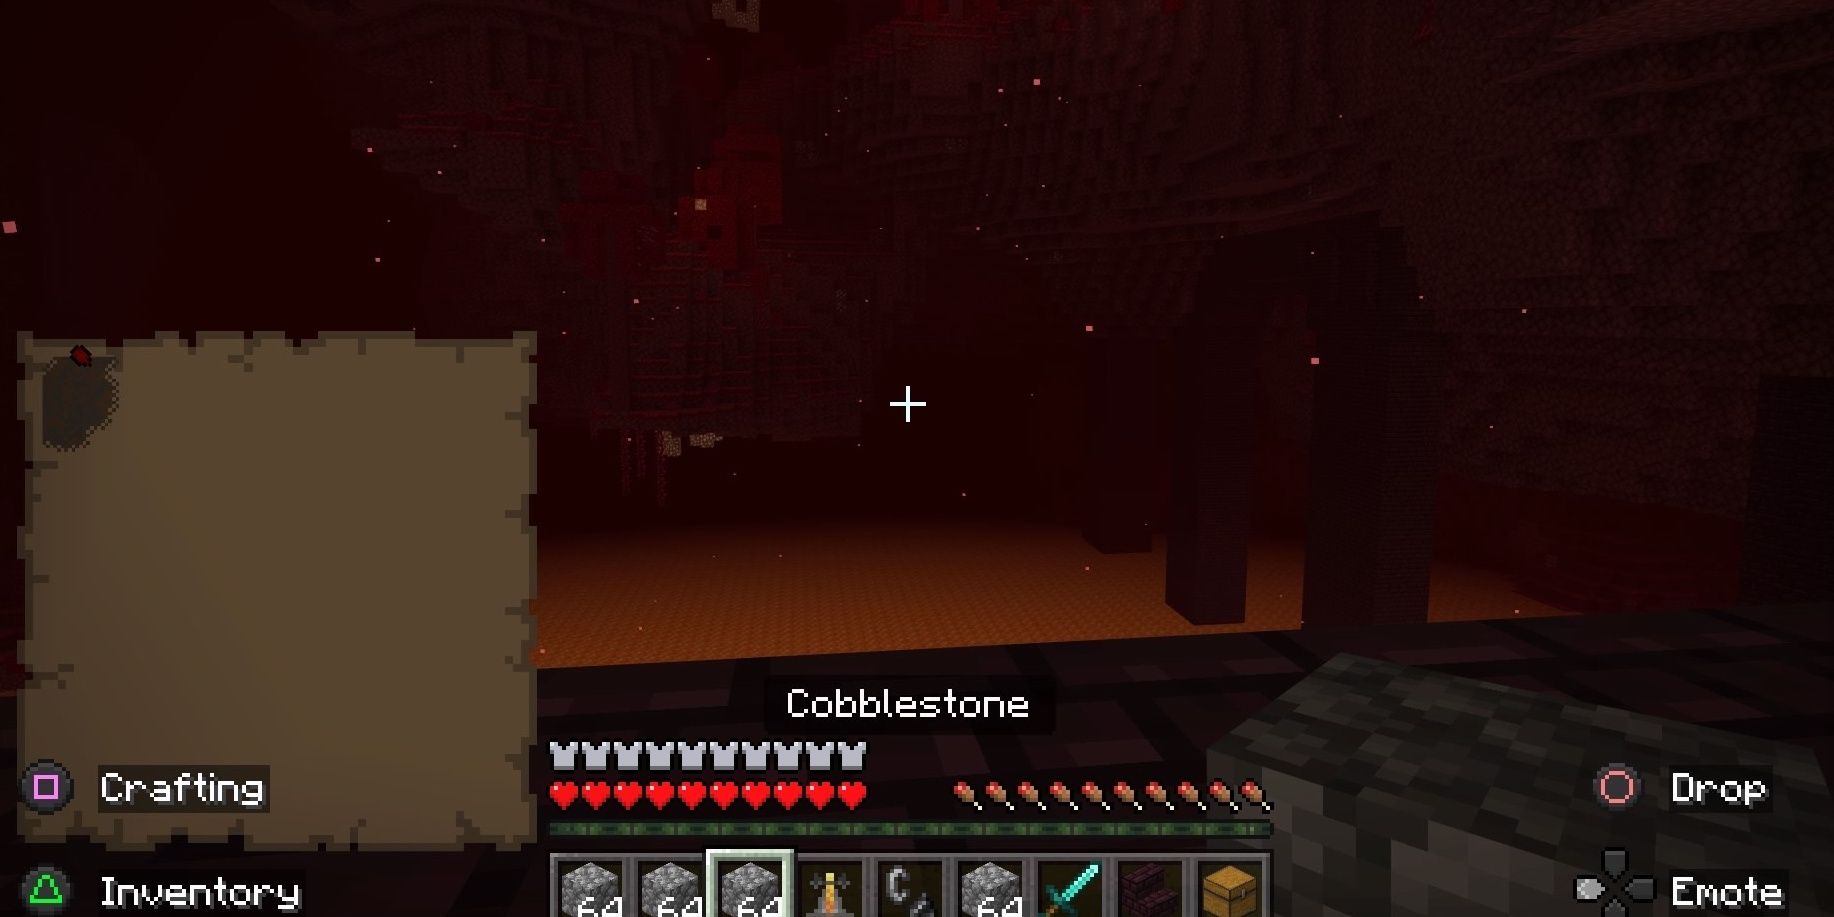 A players hot bar in Minecraft showing they holding four stacks of cobblestone in the Nether